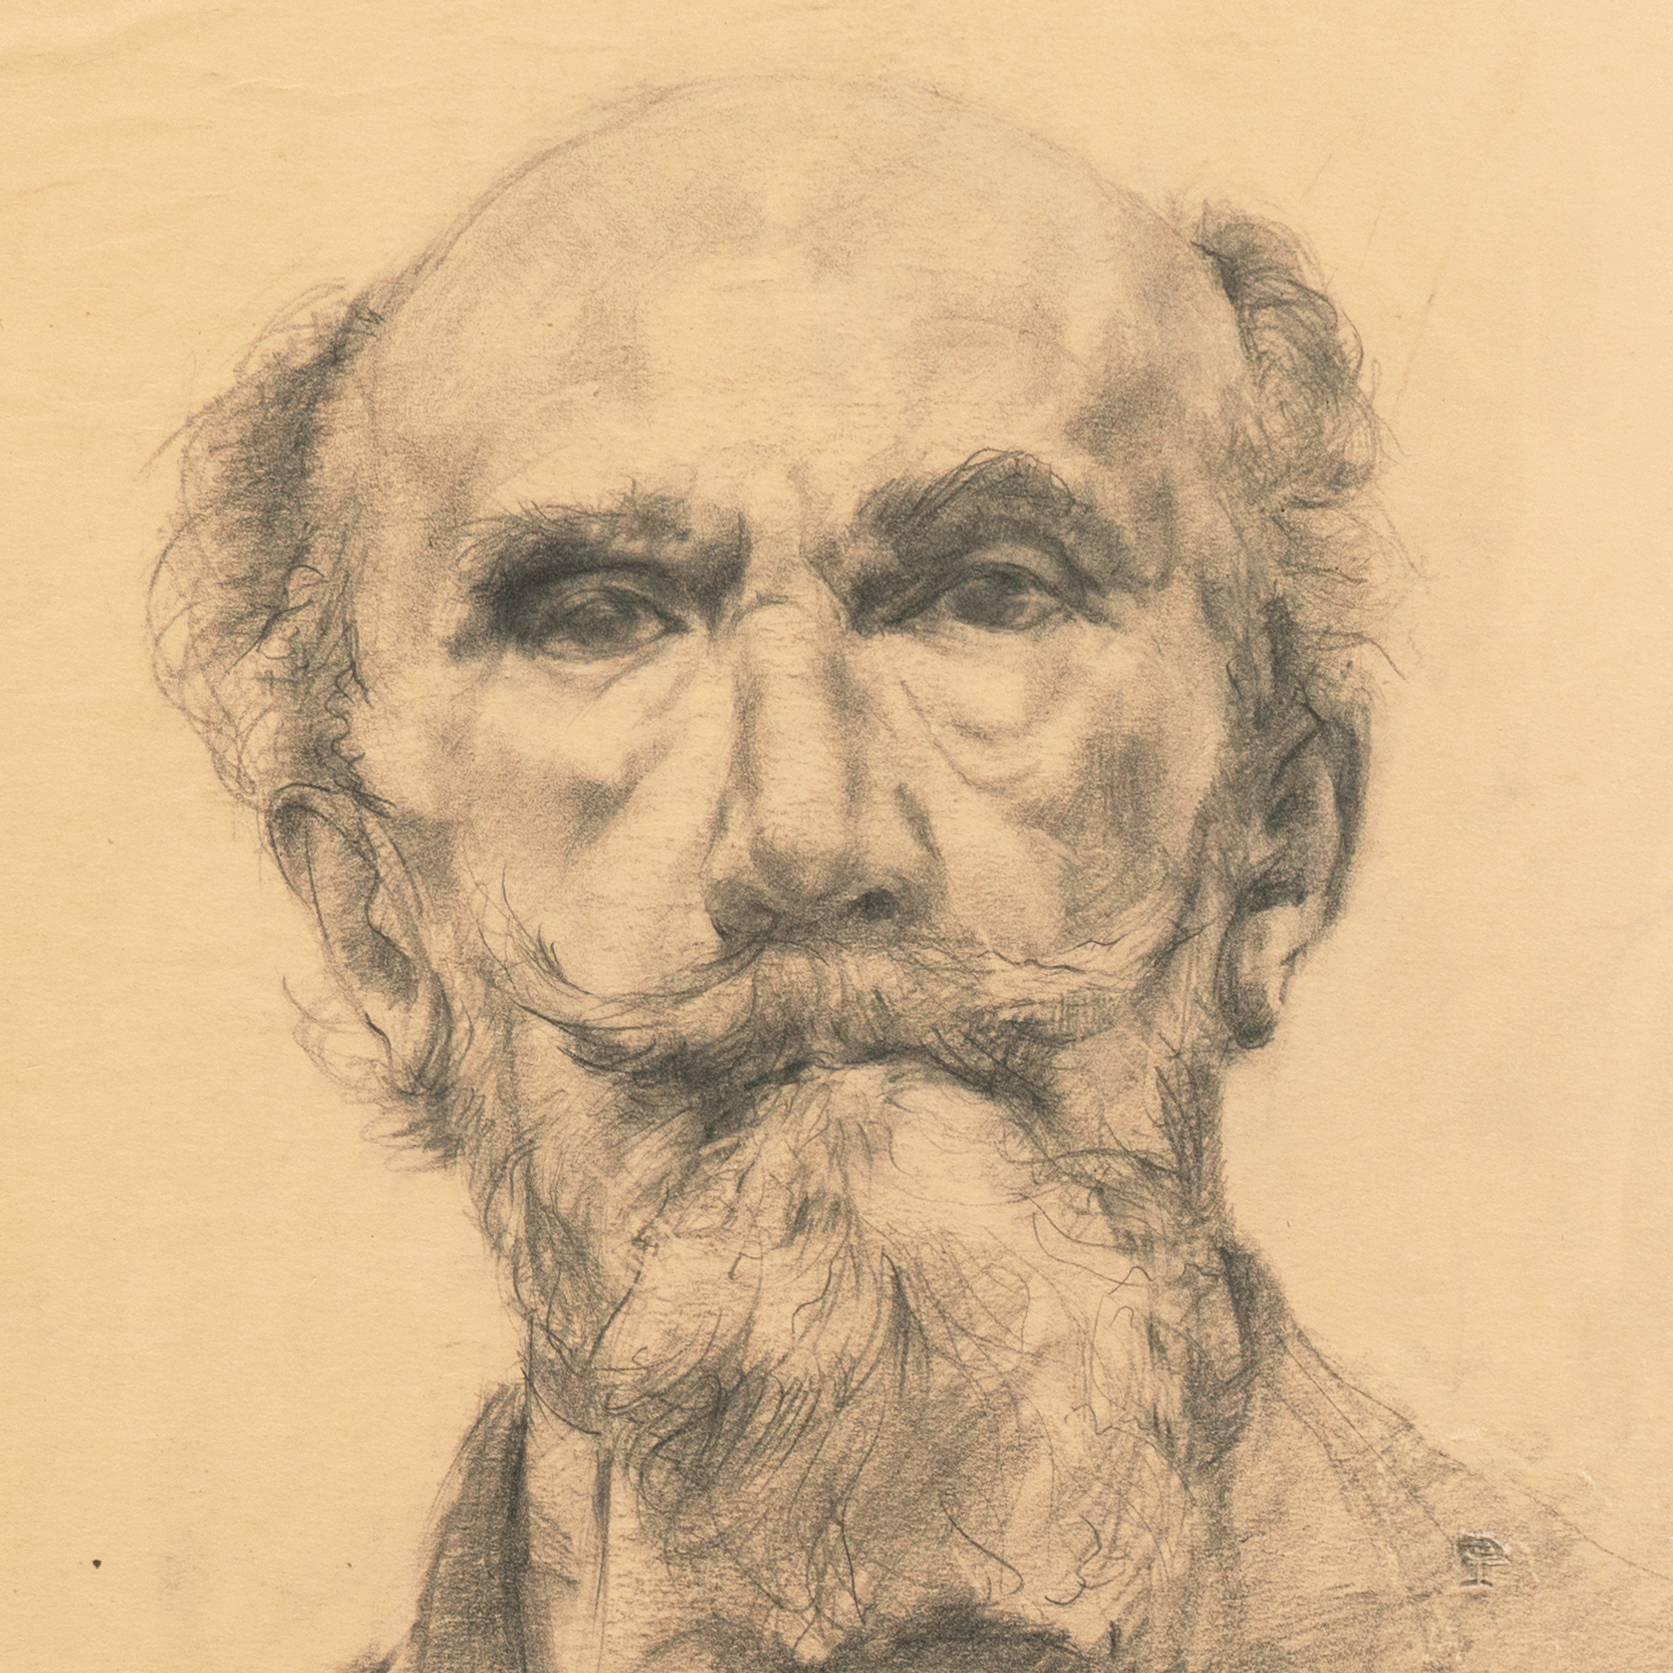 Signed lower right, "Kathleen Adair Sanders" and created circa 1950.

A sensitively drawn, graphite portrait of an aristocratic gentleman shown fixing the viewer with a penetrating gaze. 